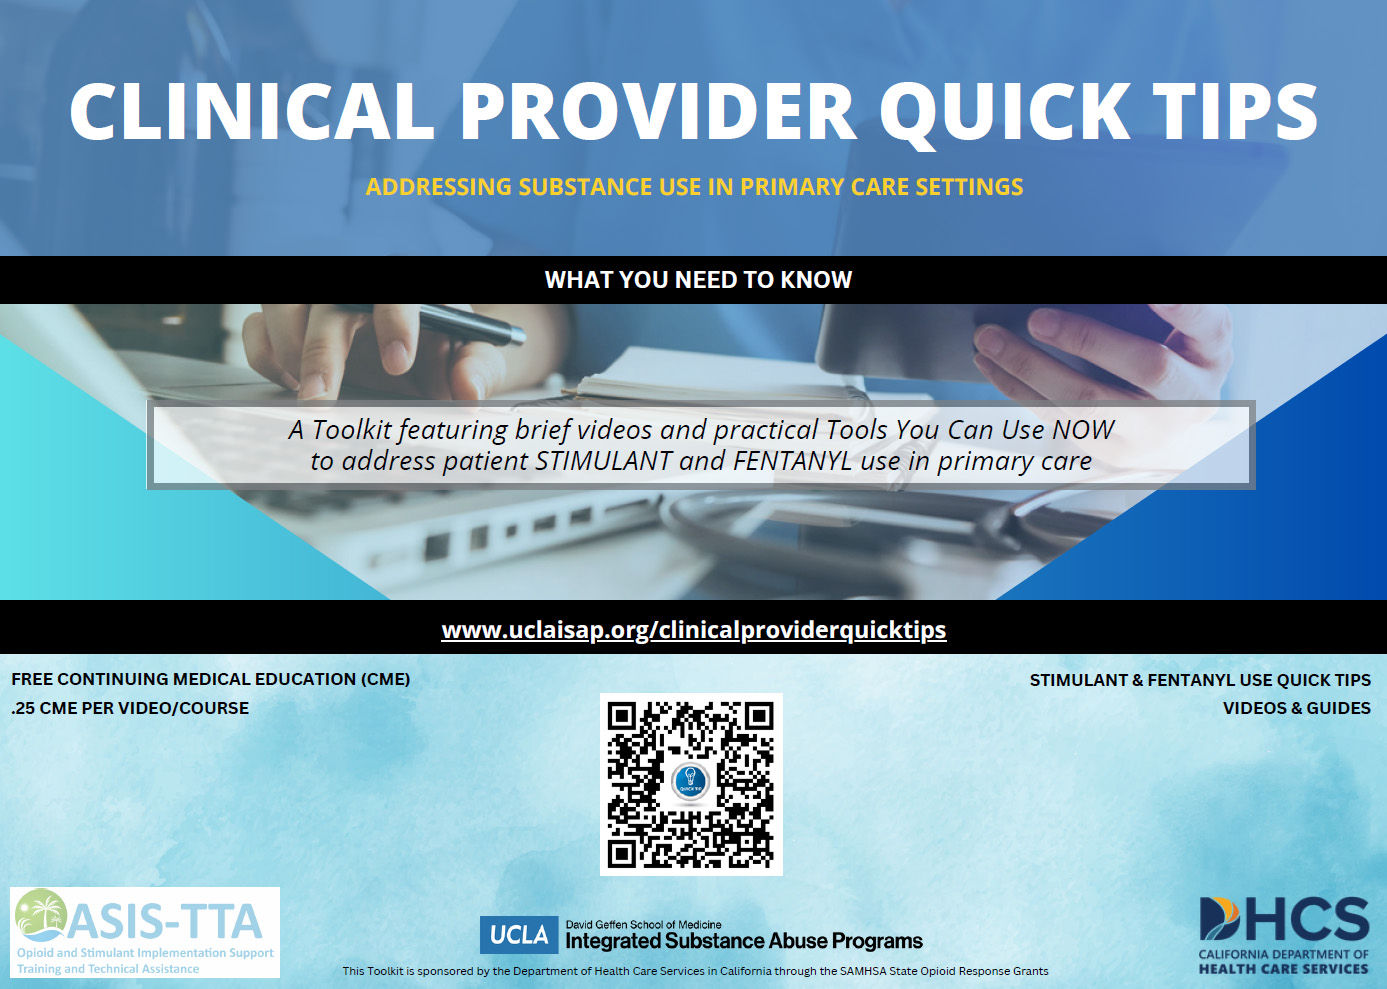 Banner announcing the launch of the Clinical Provider Quick Tips website